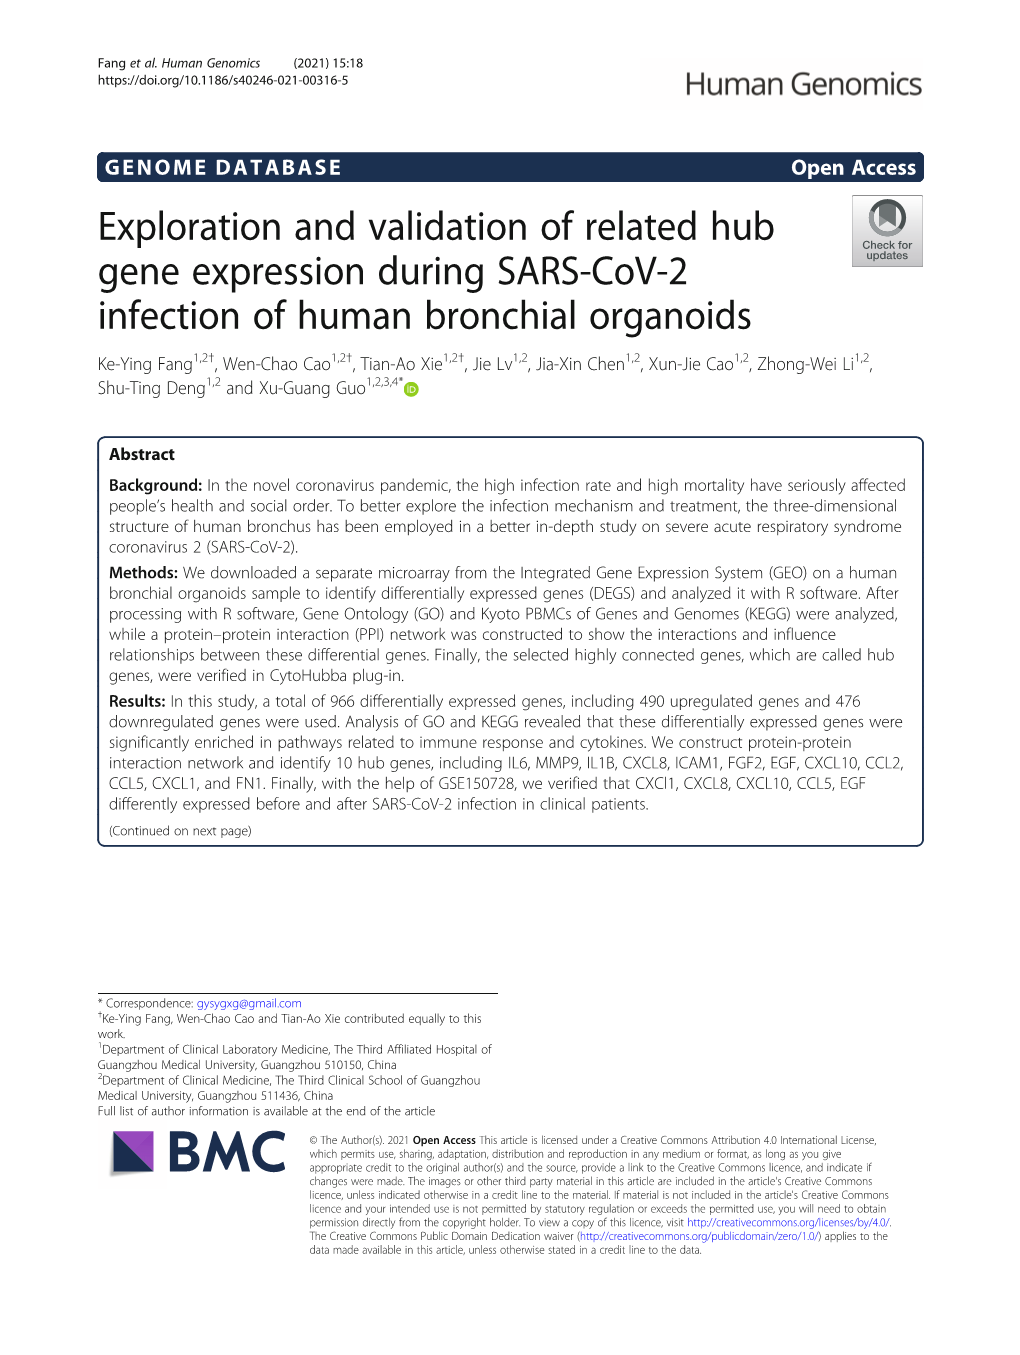 Exploration and Validation of Related Hub Gene Expression During SARS-Cov-2 Infection of Human Bronchial Organoids